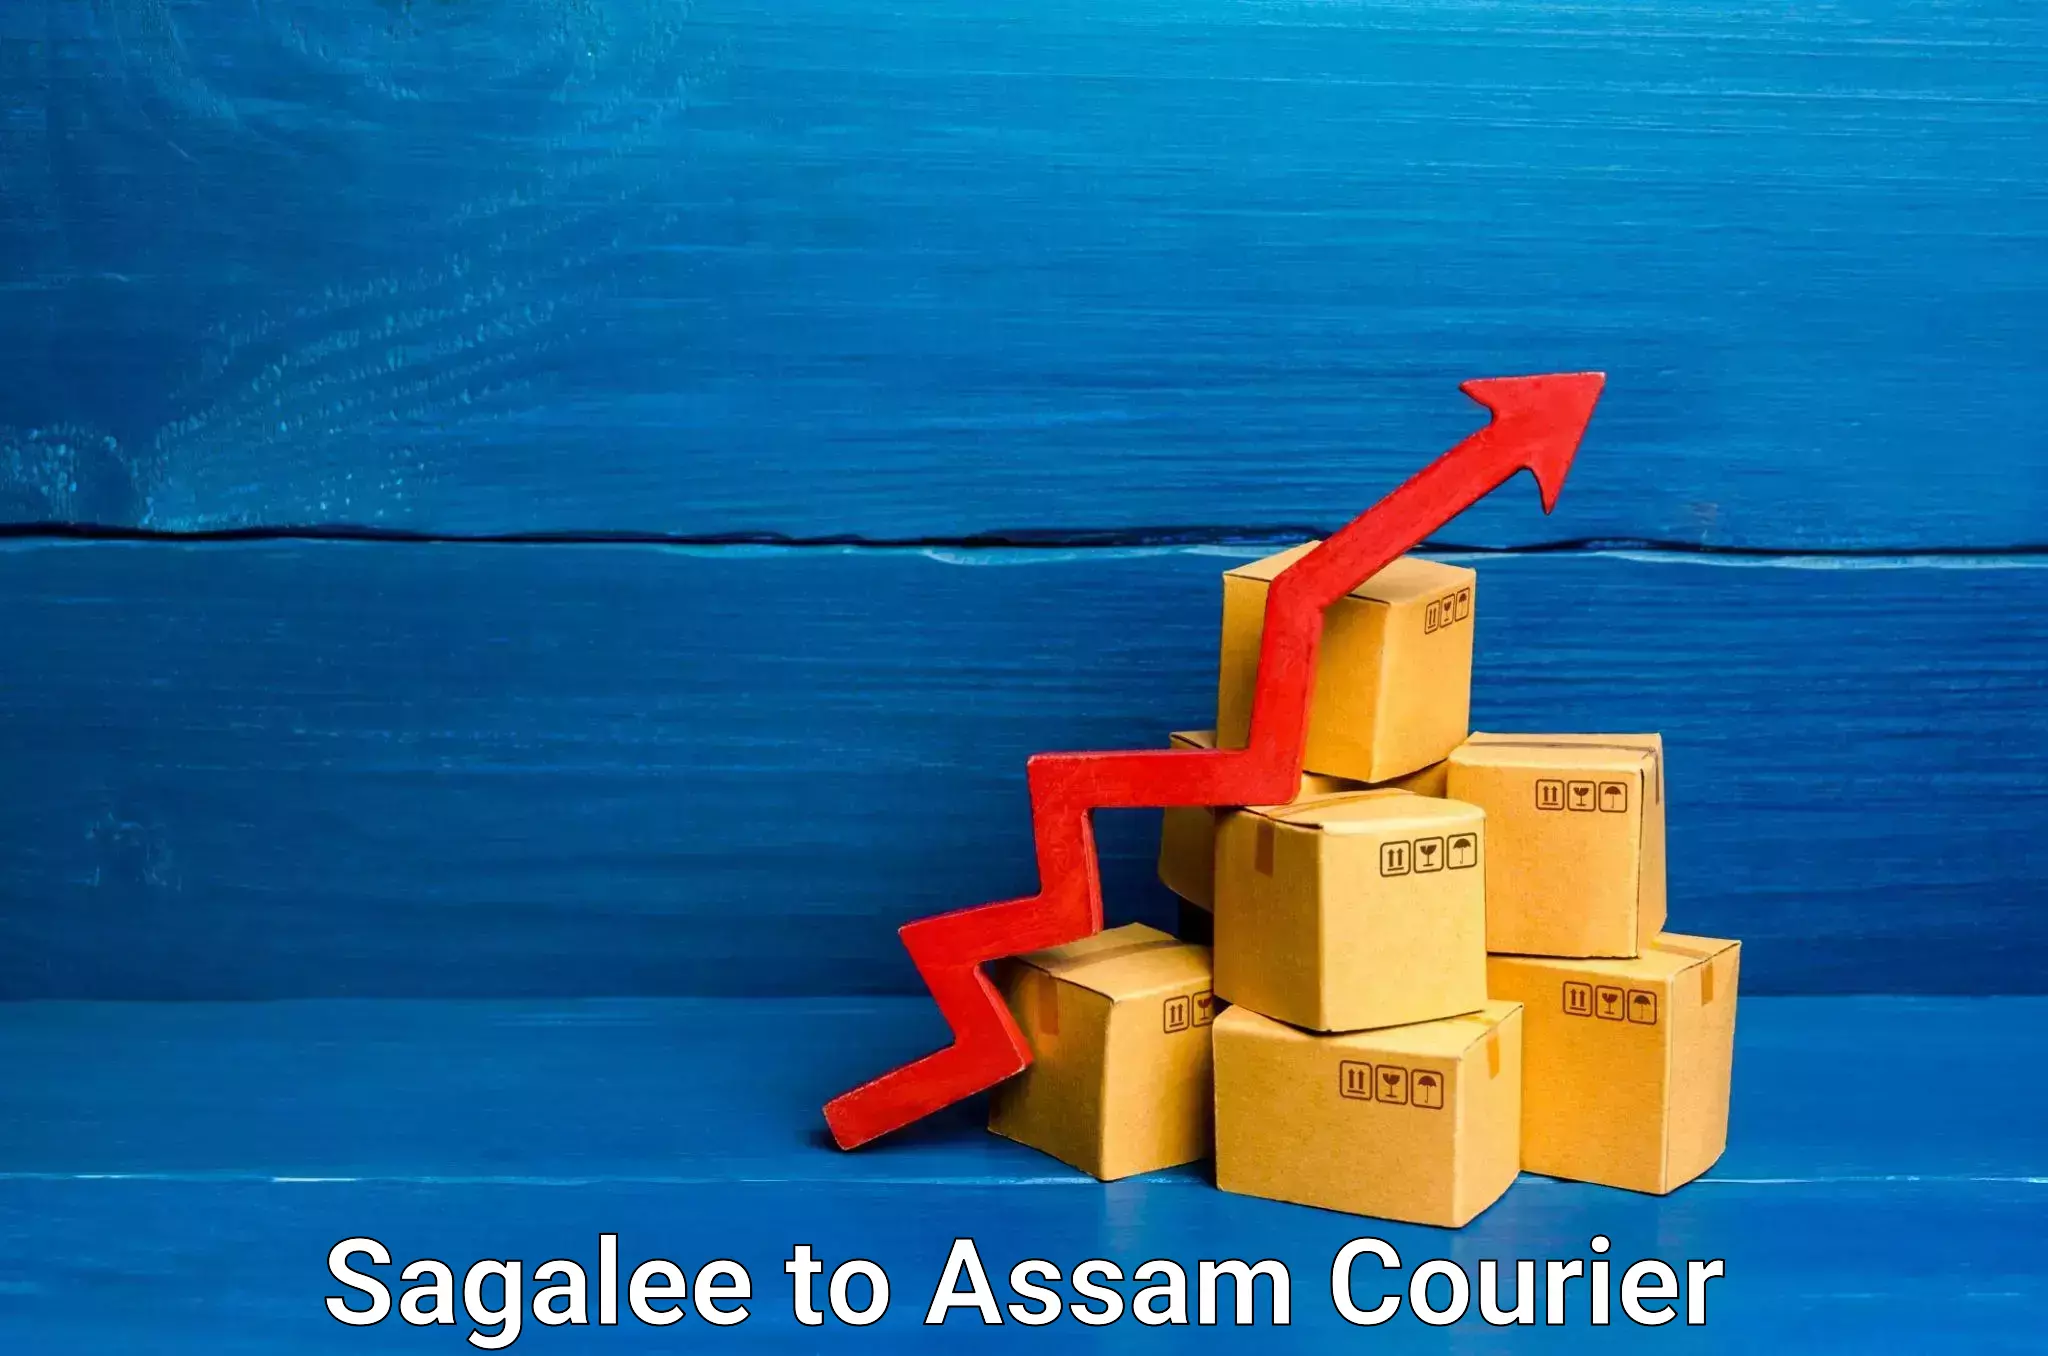 Courier service partnerships Sagalee to Assam